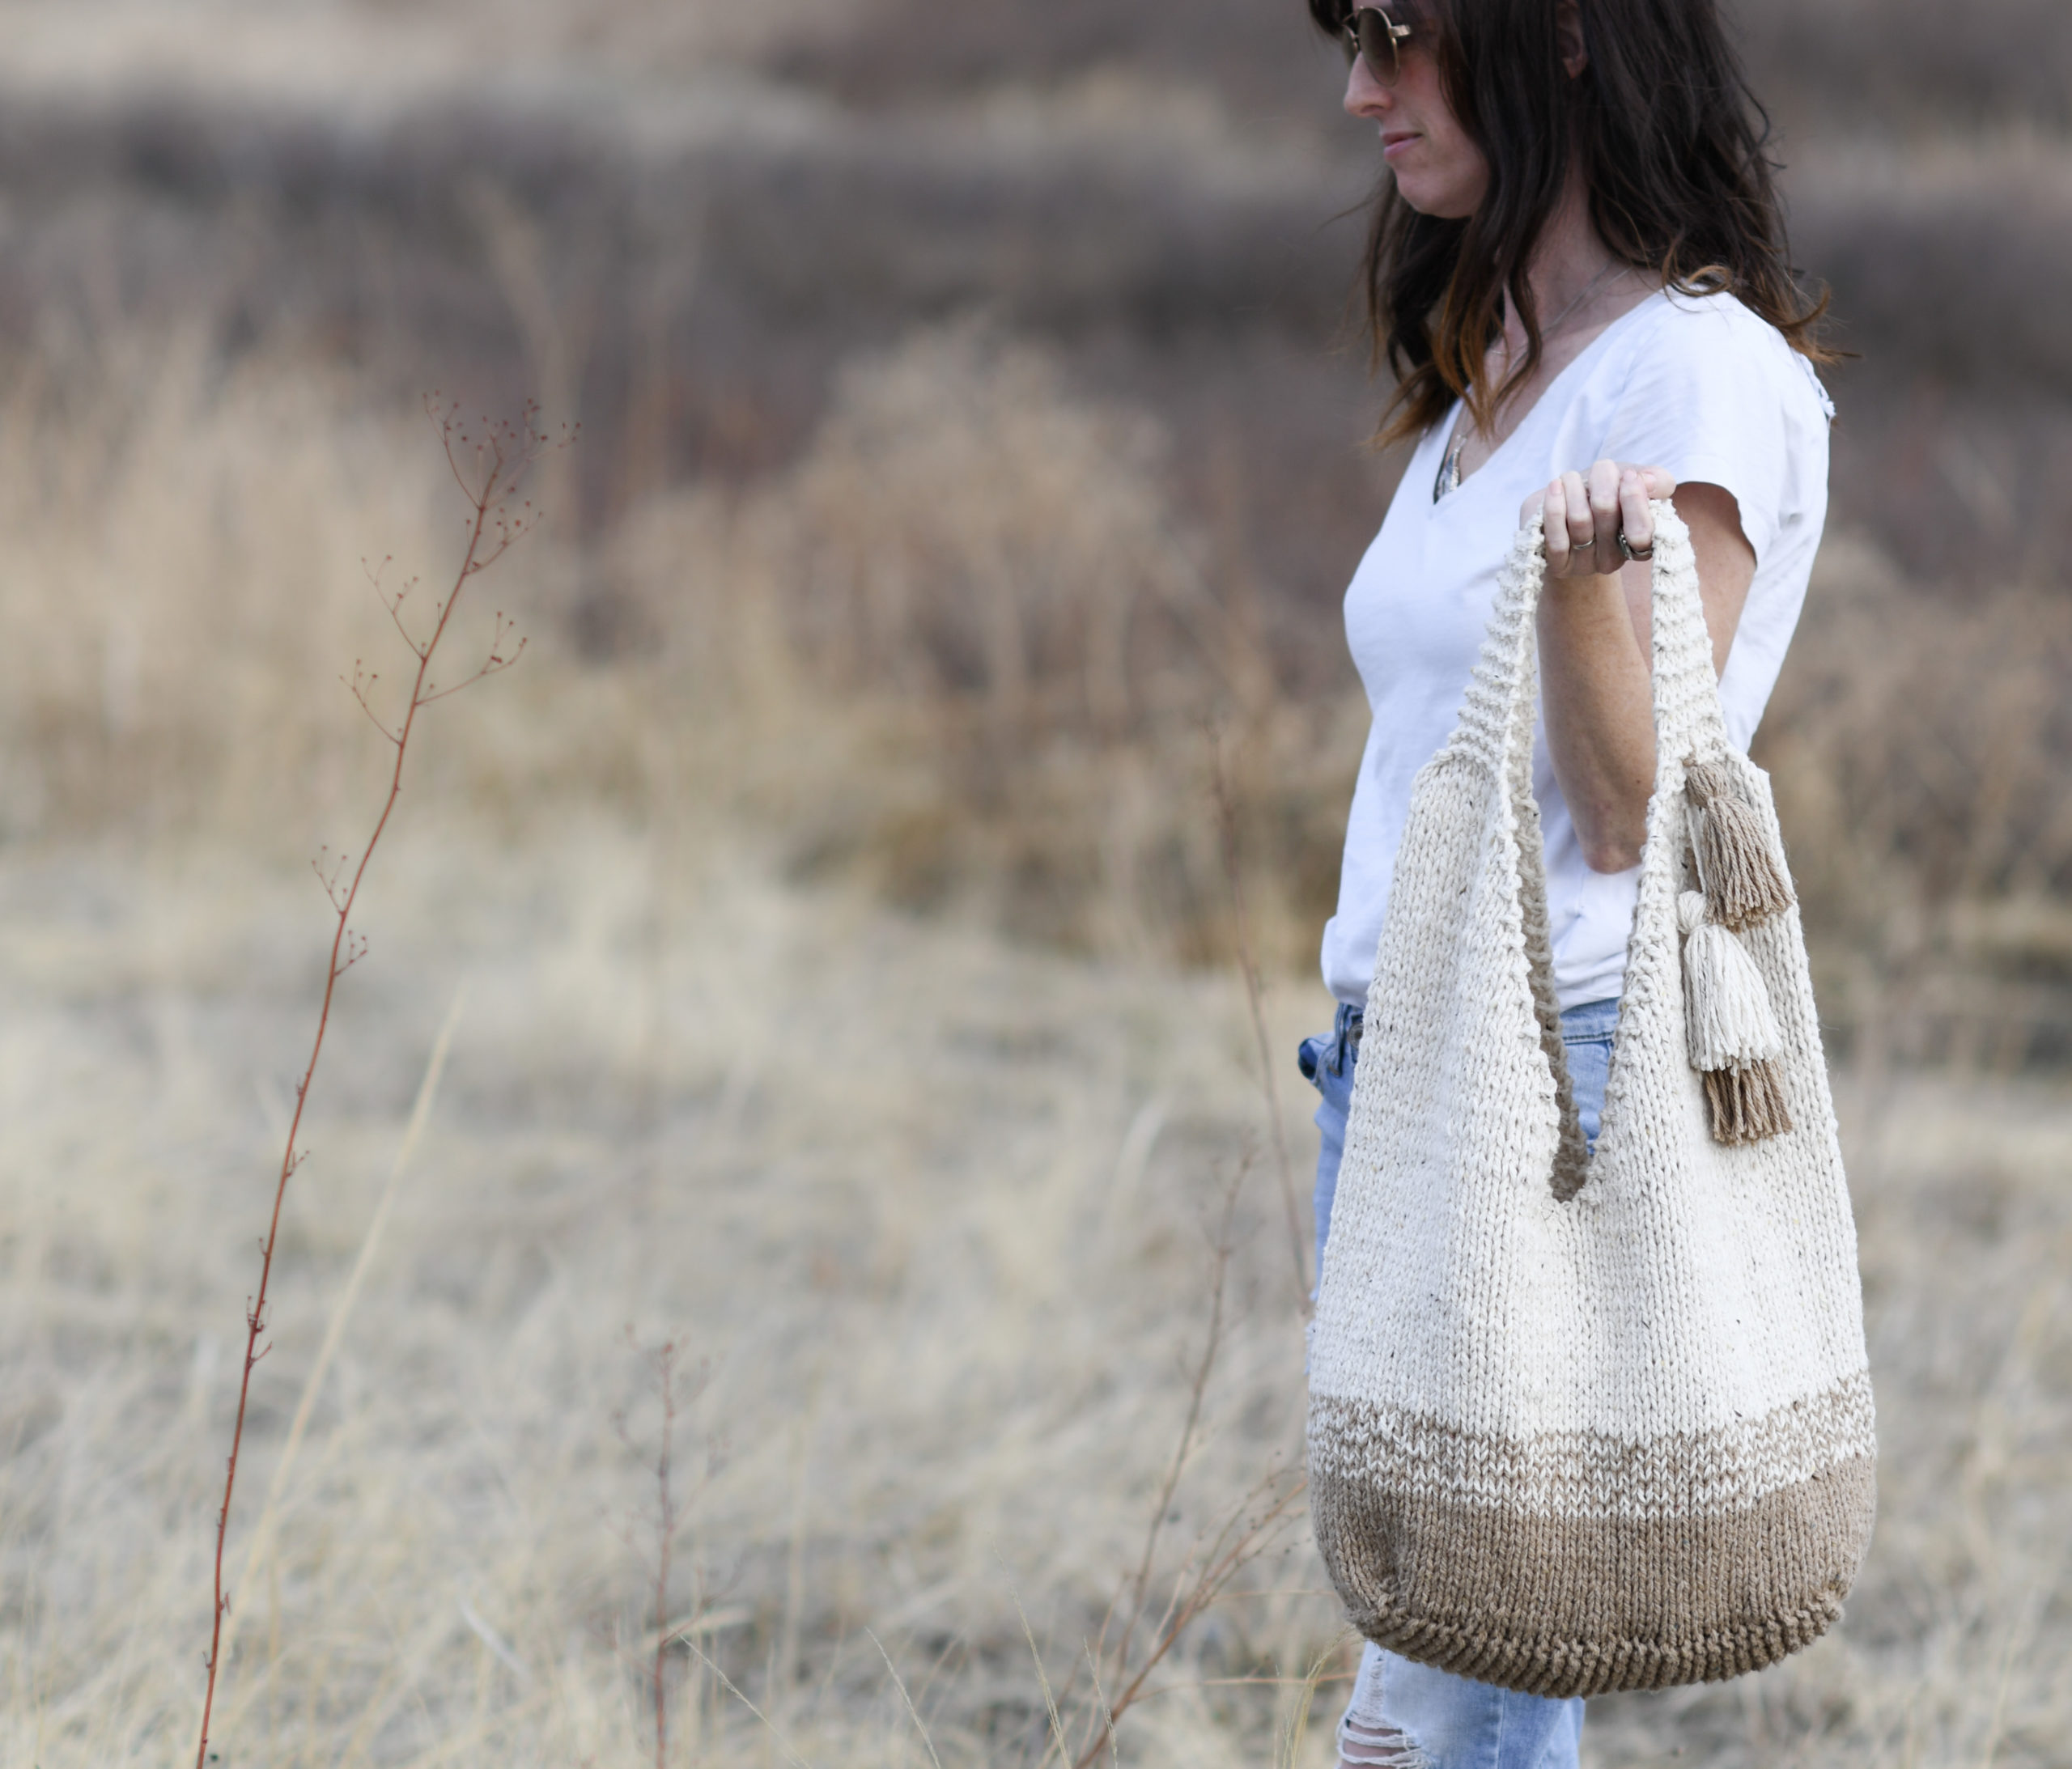 Mohave Slouchy Tote Bag Knitting Pattern – Mama In A Stitch